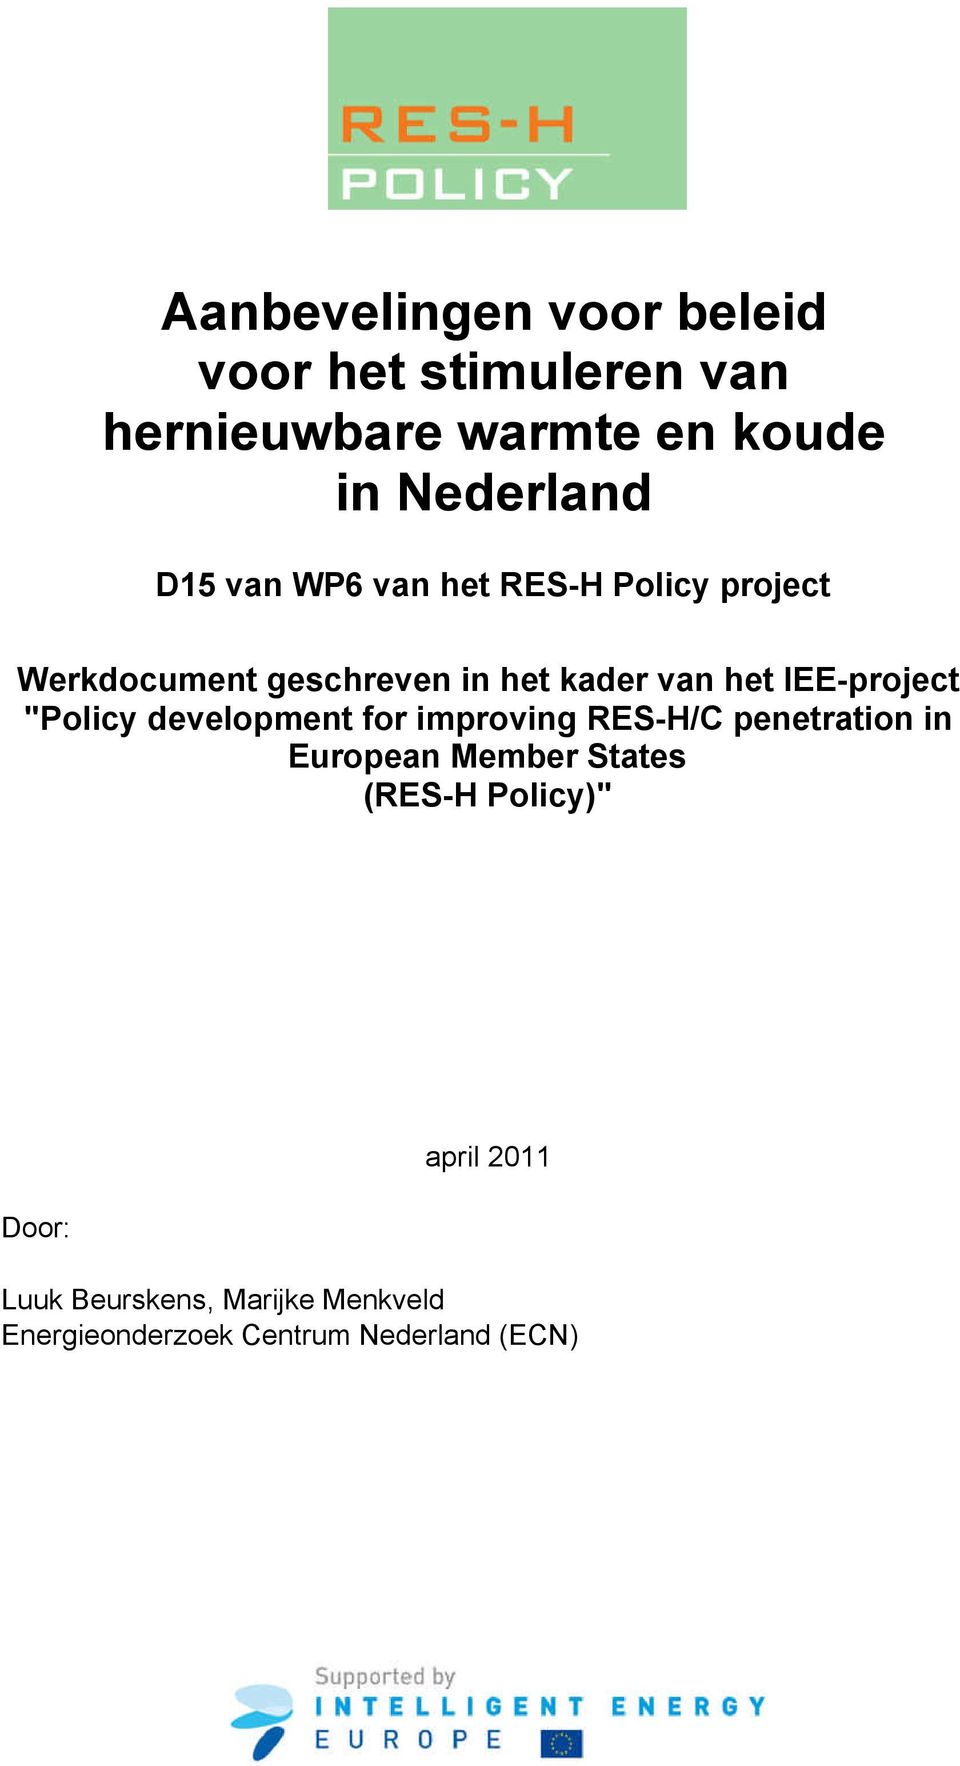 IEE-project "Policy development for improving RES-H/C penetration in European Member States